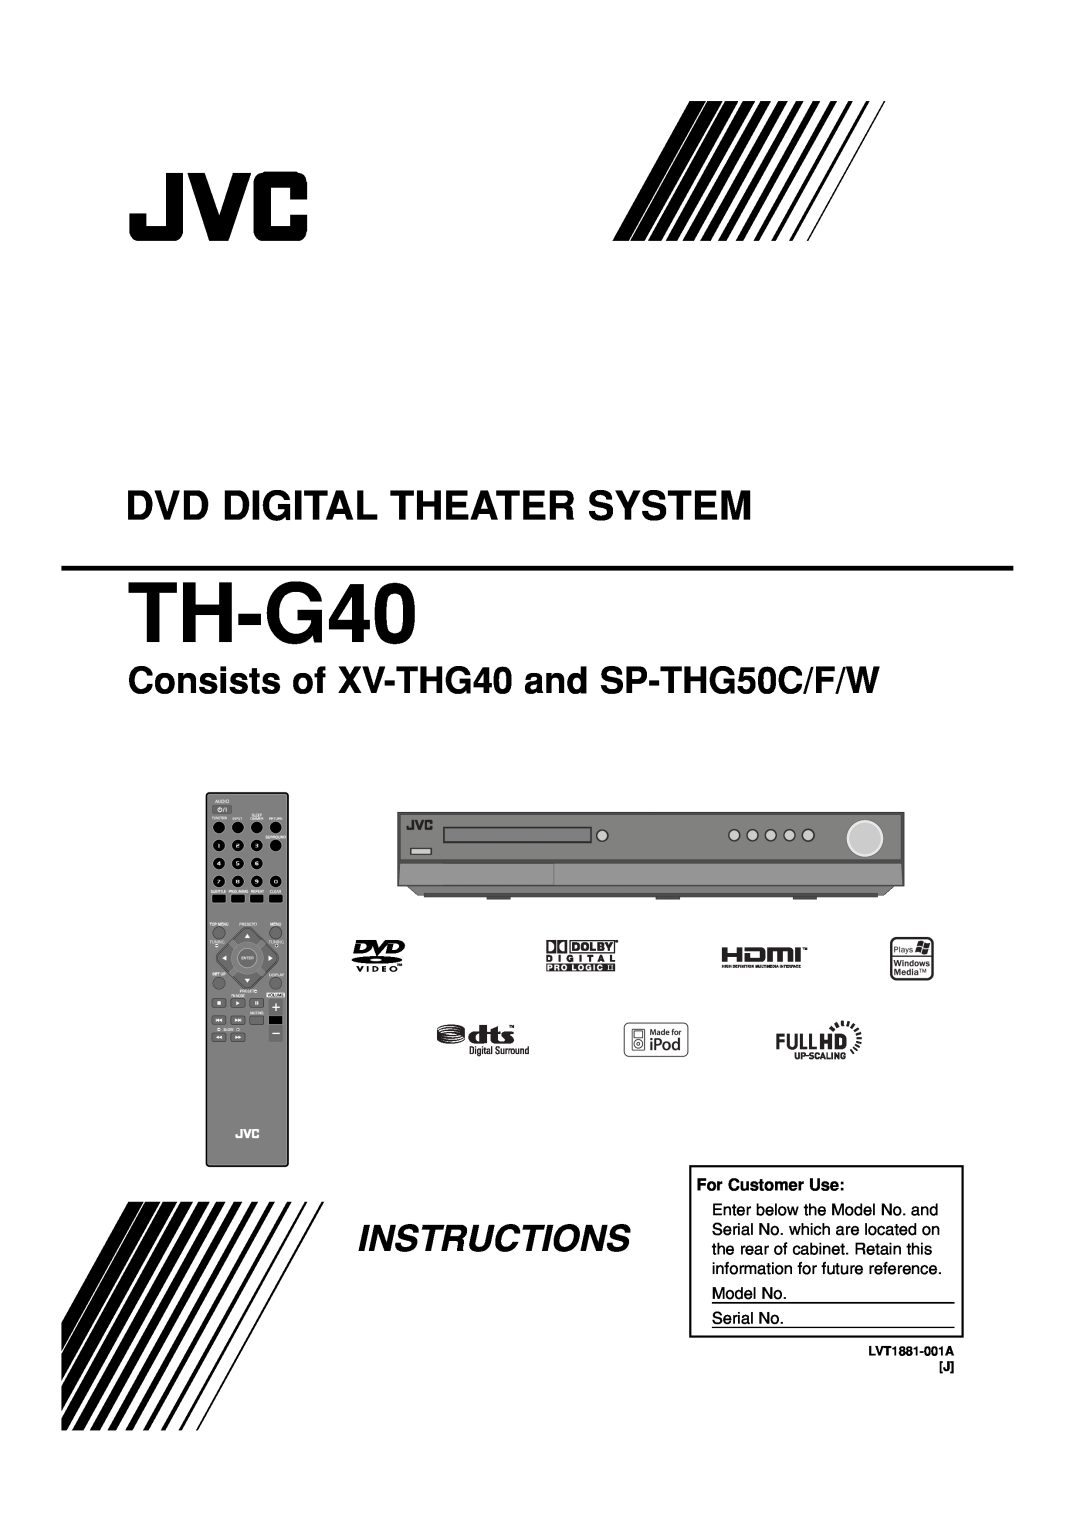 JVC TH-G40 manual Dvd Digital Theater System, Consists of XV-THG40 and SP-THG50C/F/W, Instructions, For Customer Use 